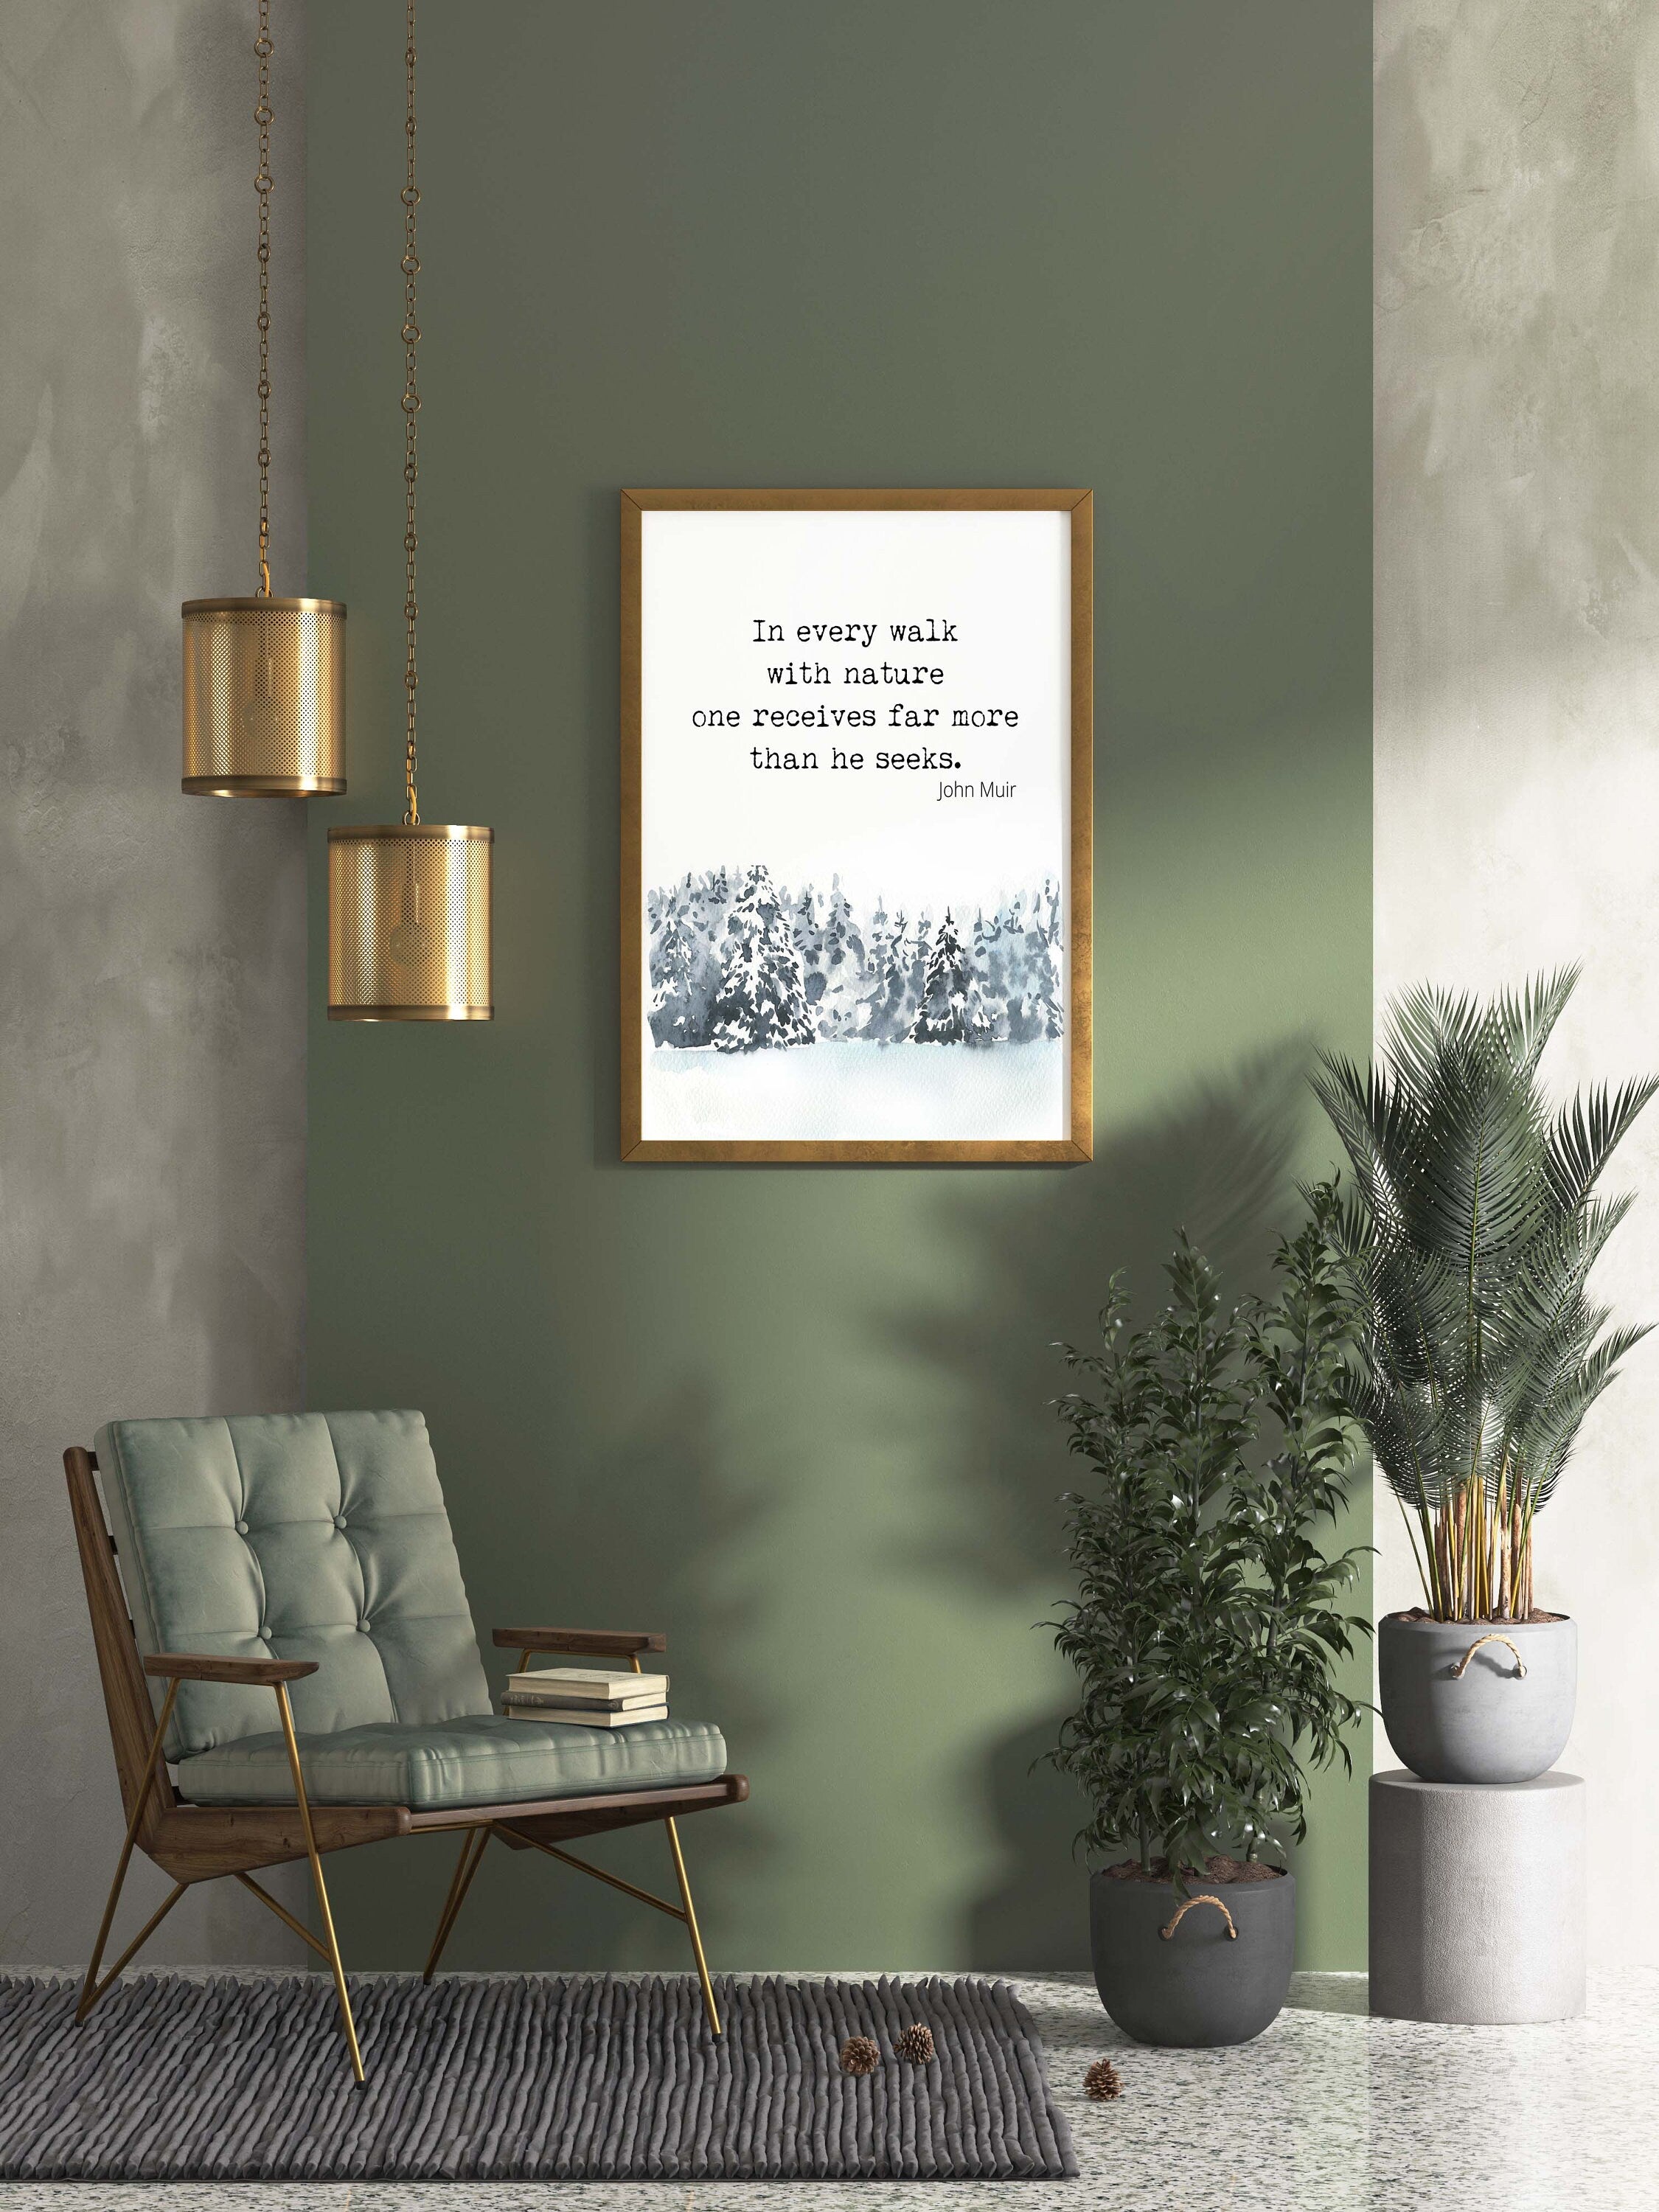 John Muir Print for Country Decor, In Every Walk With Nature Quote Wall Art Prints